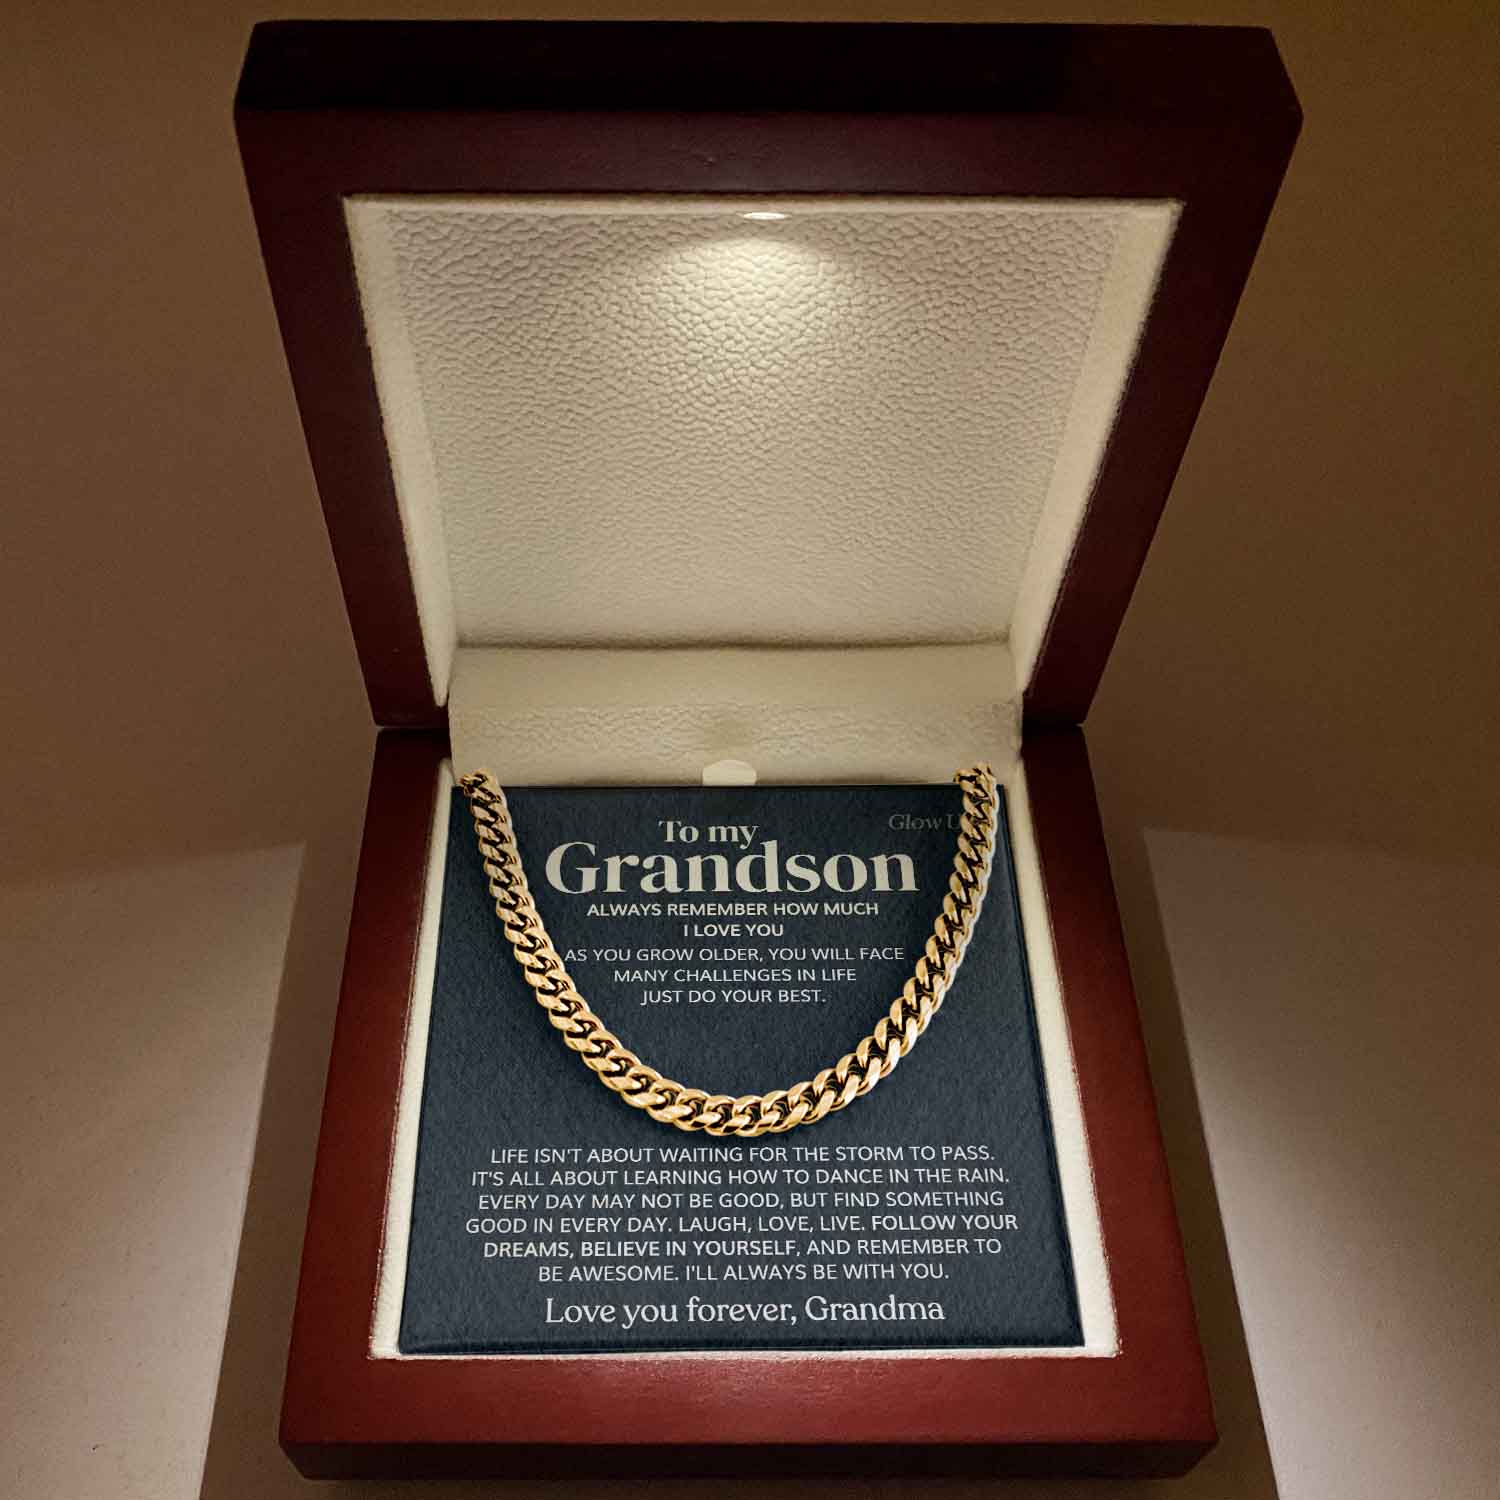 ShineOn Fulfillment Jewelry 14K Yellow Gold Finish / Luxury LED Box To my Grandson - Always remember - Cuban Link Chain